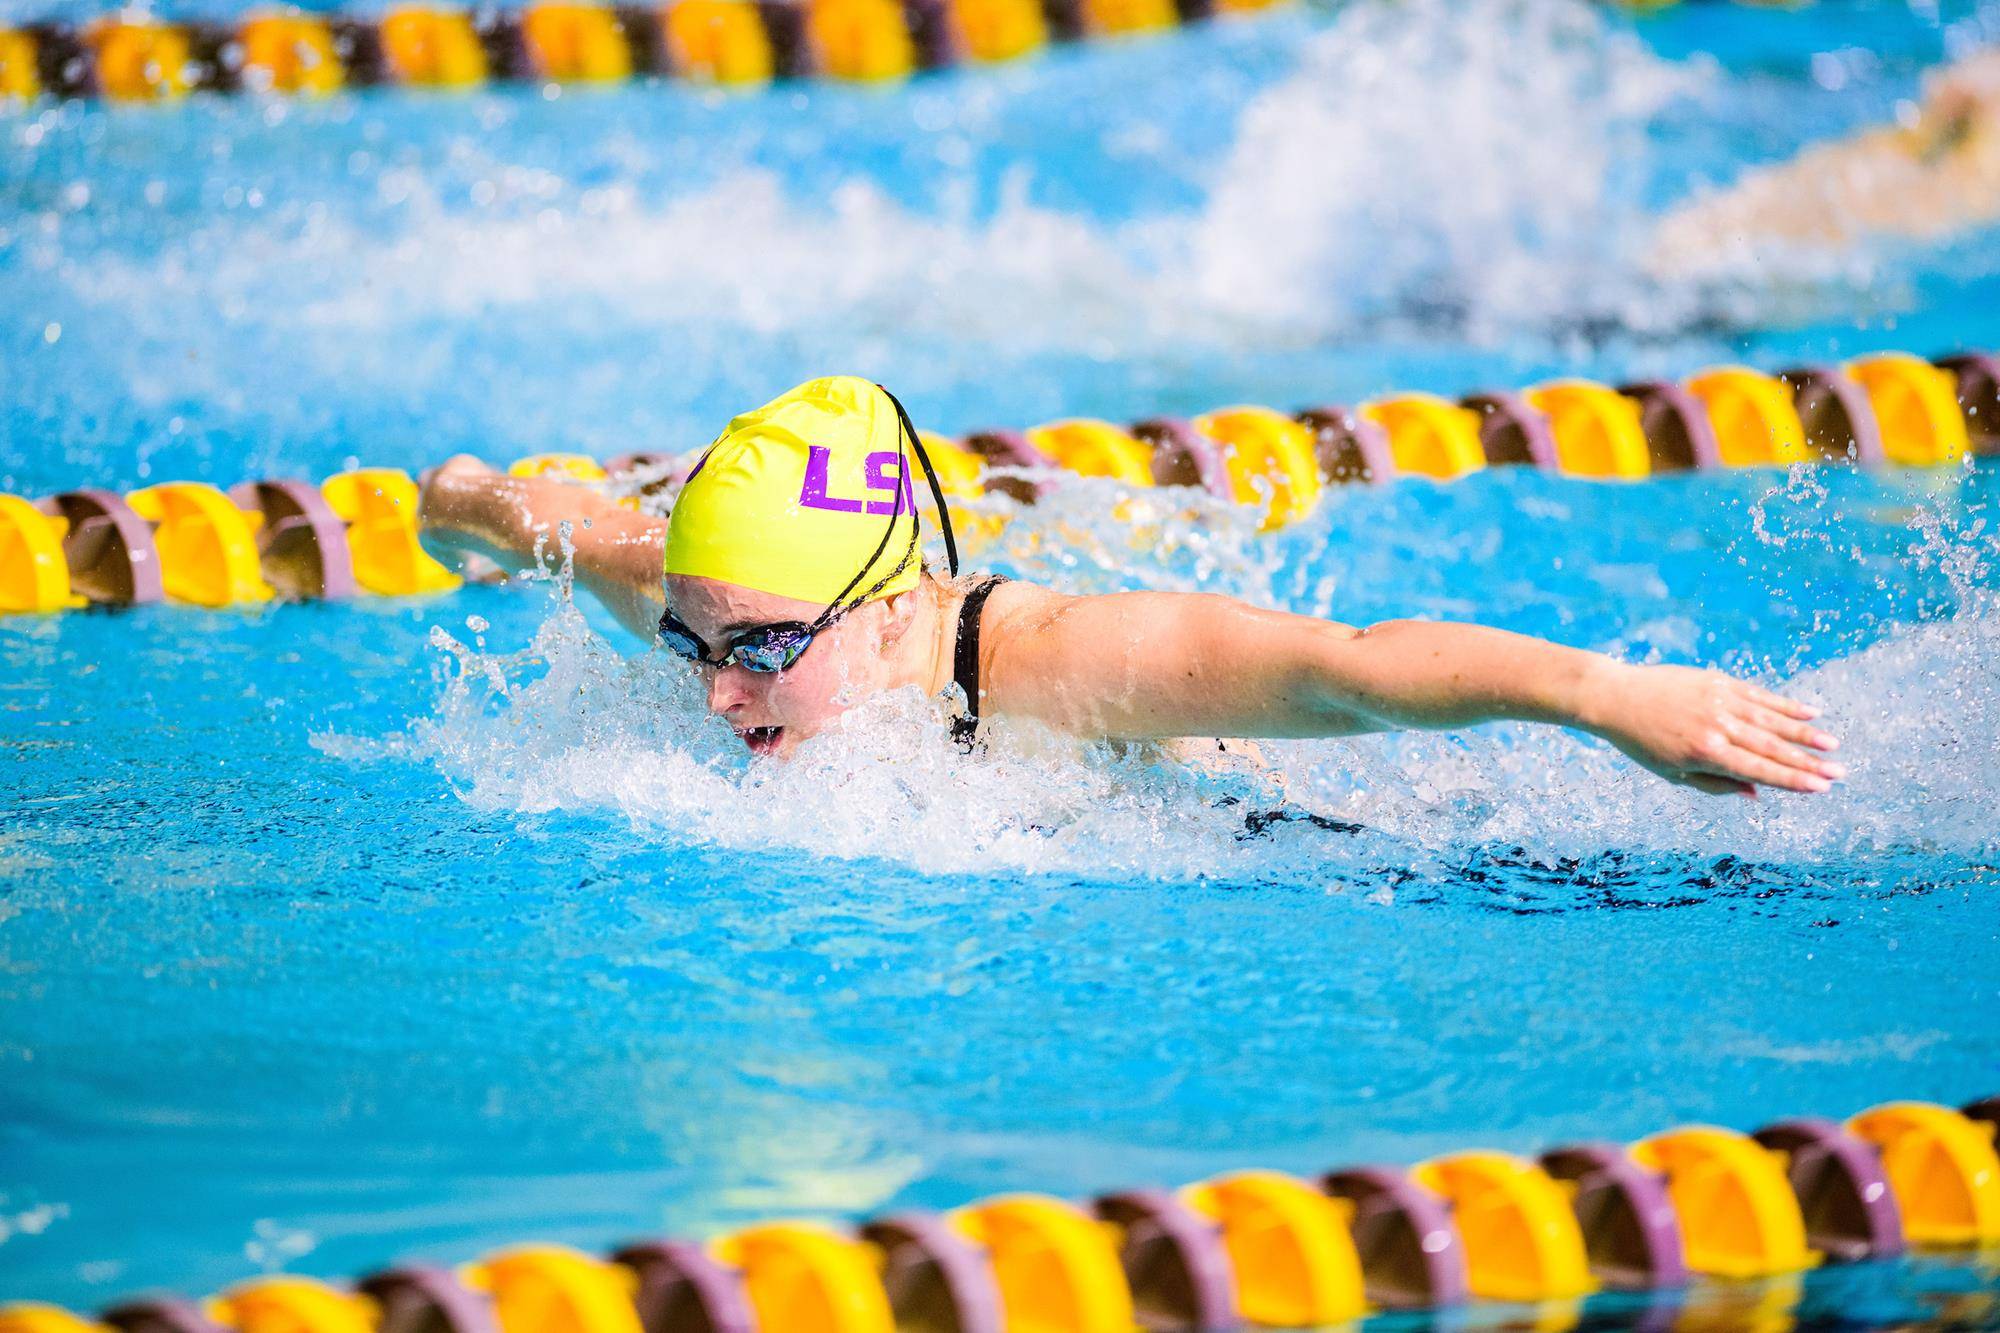 Helen Grossman swimming with her head down with an LSU swim cap and goggles on